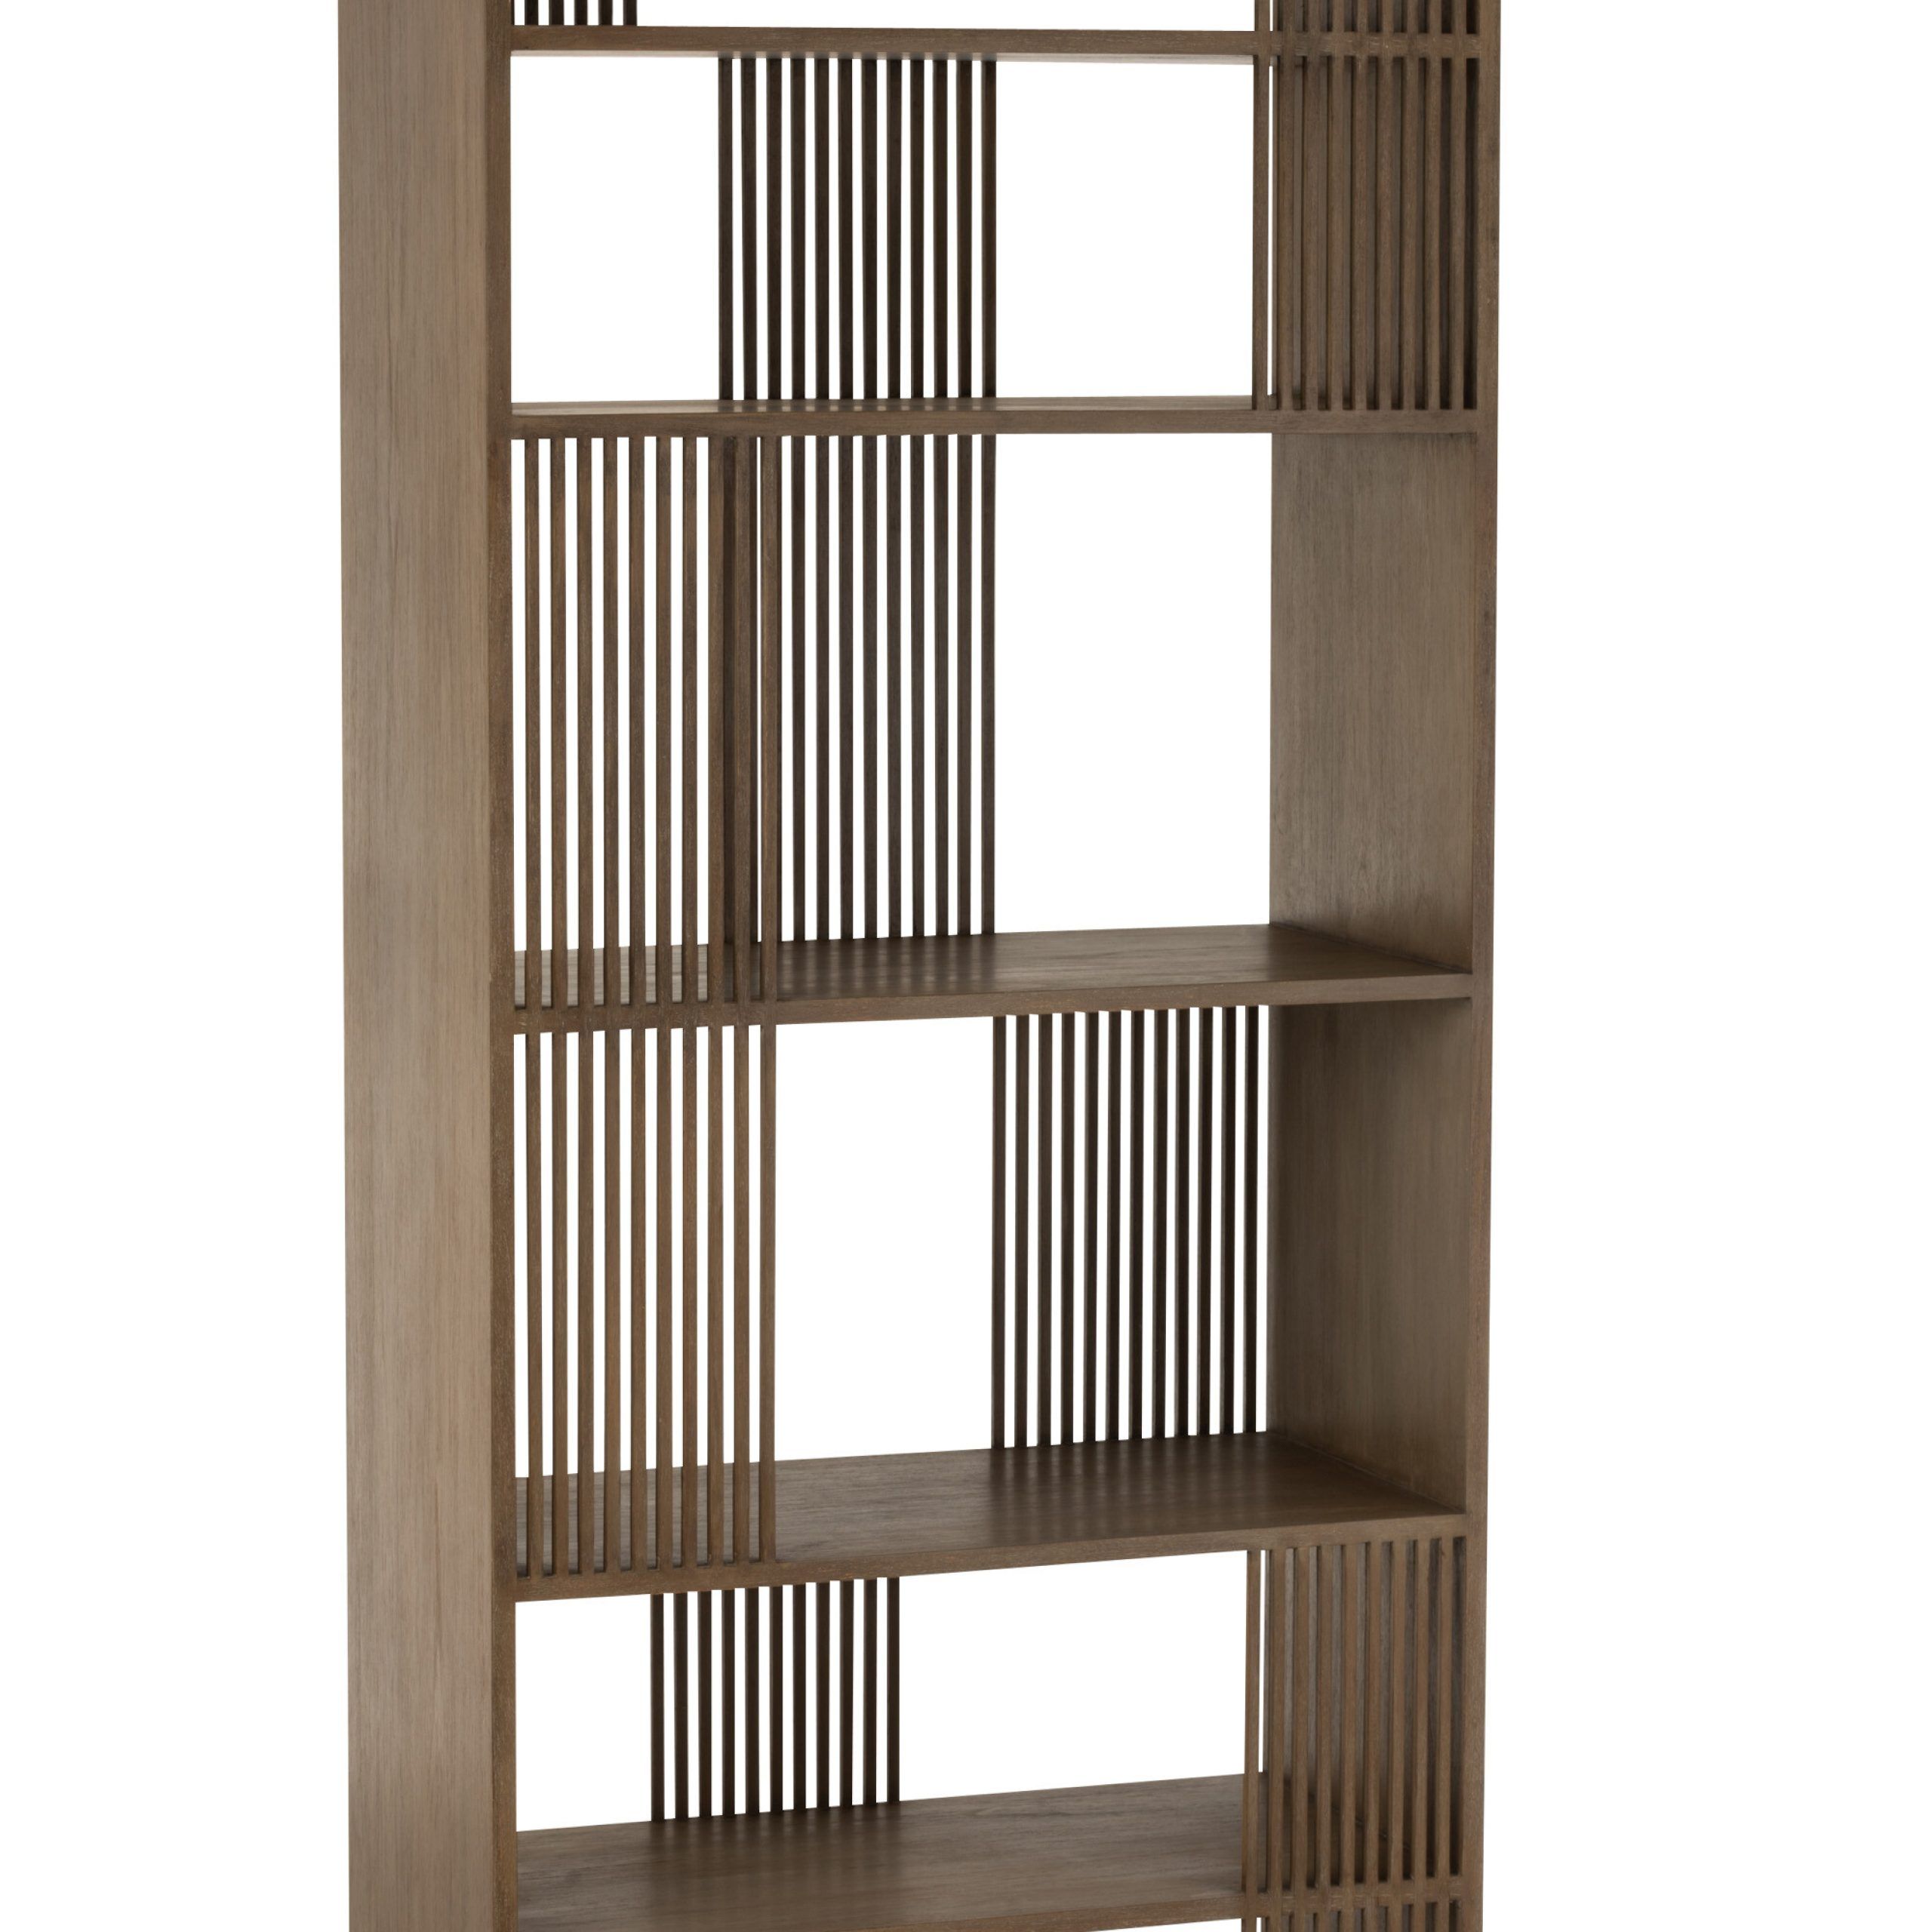 Bookcase Vertical Slats Wd Br | J Linejolipa With Regard To Bookcases With Slats (View 13 of 15)